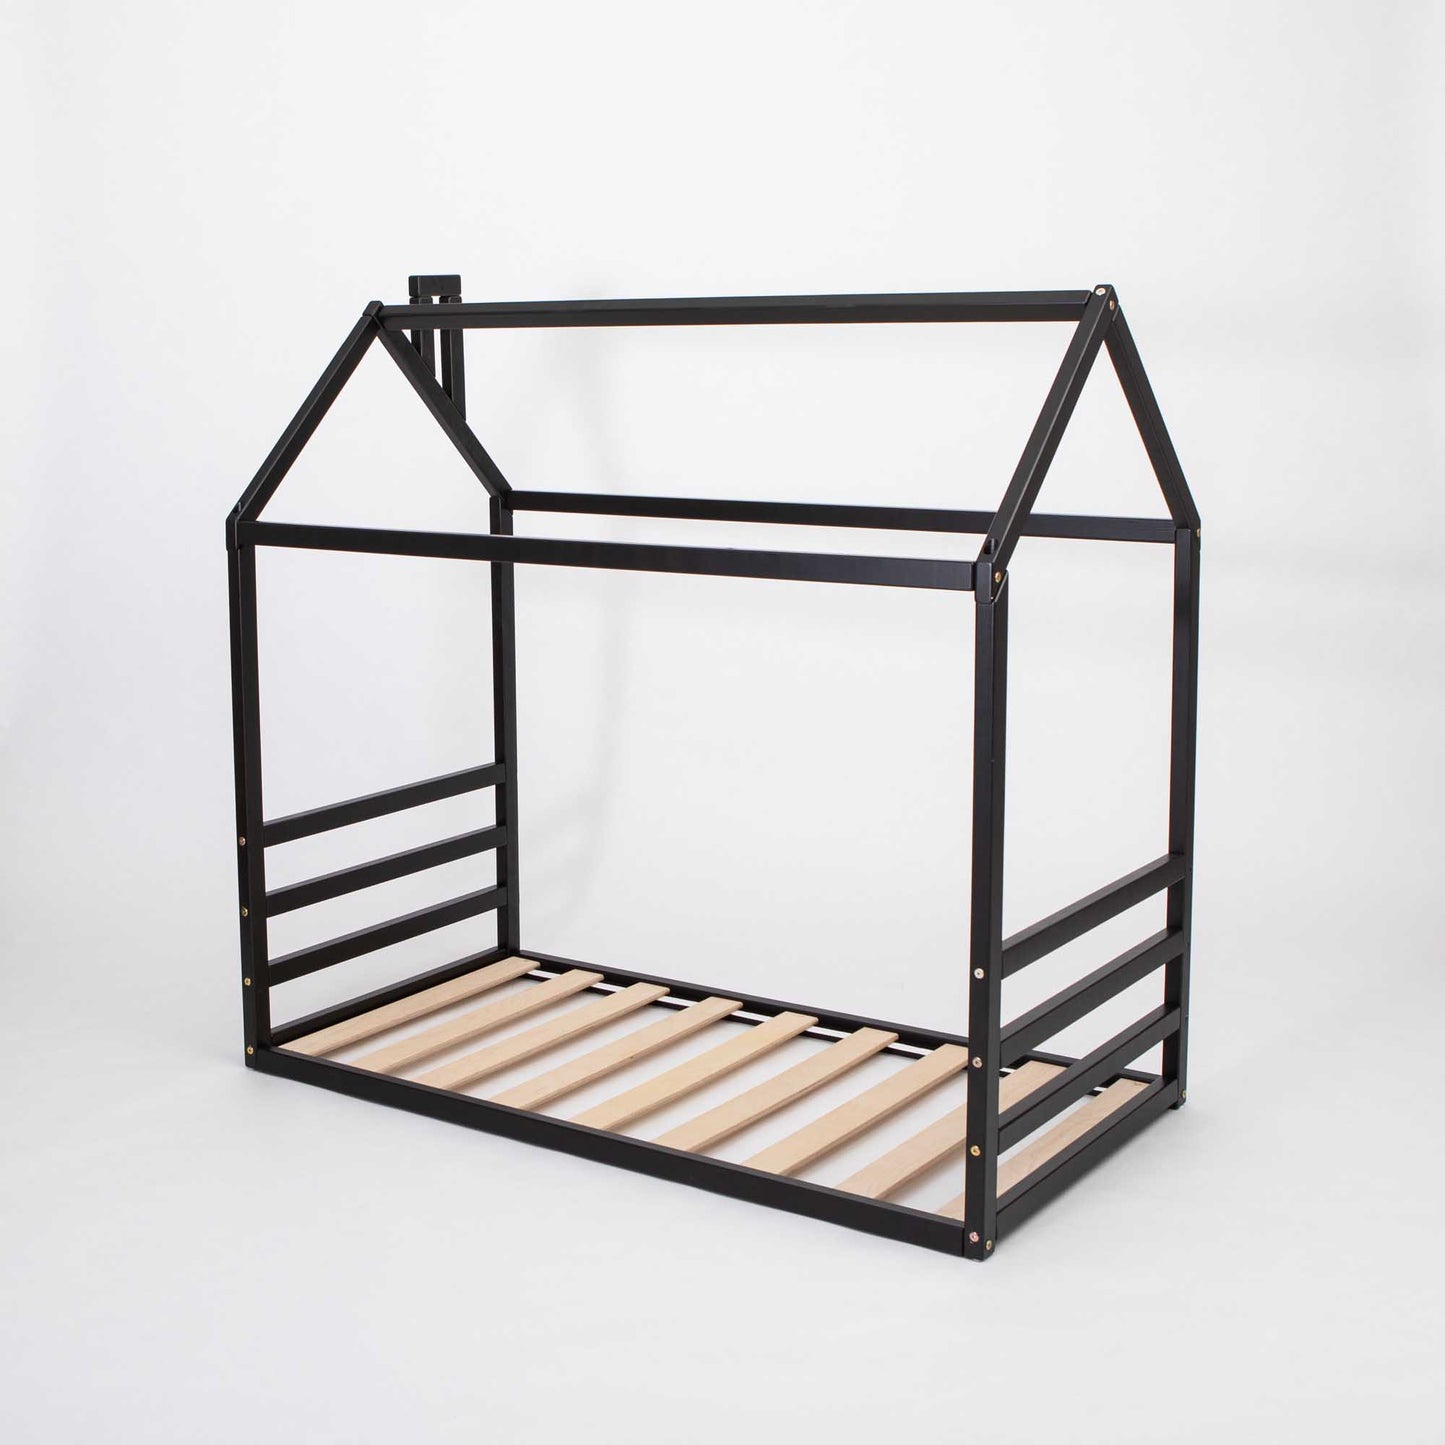 Floor house-frame bed with a horizontal headboard and footboard